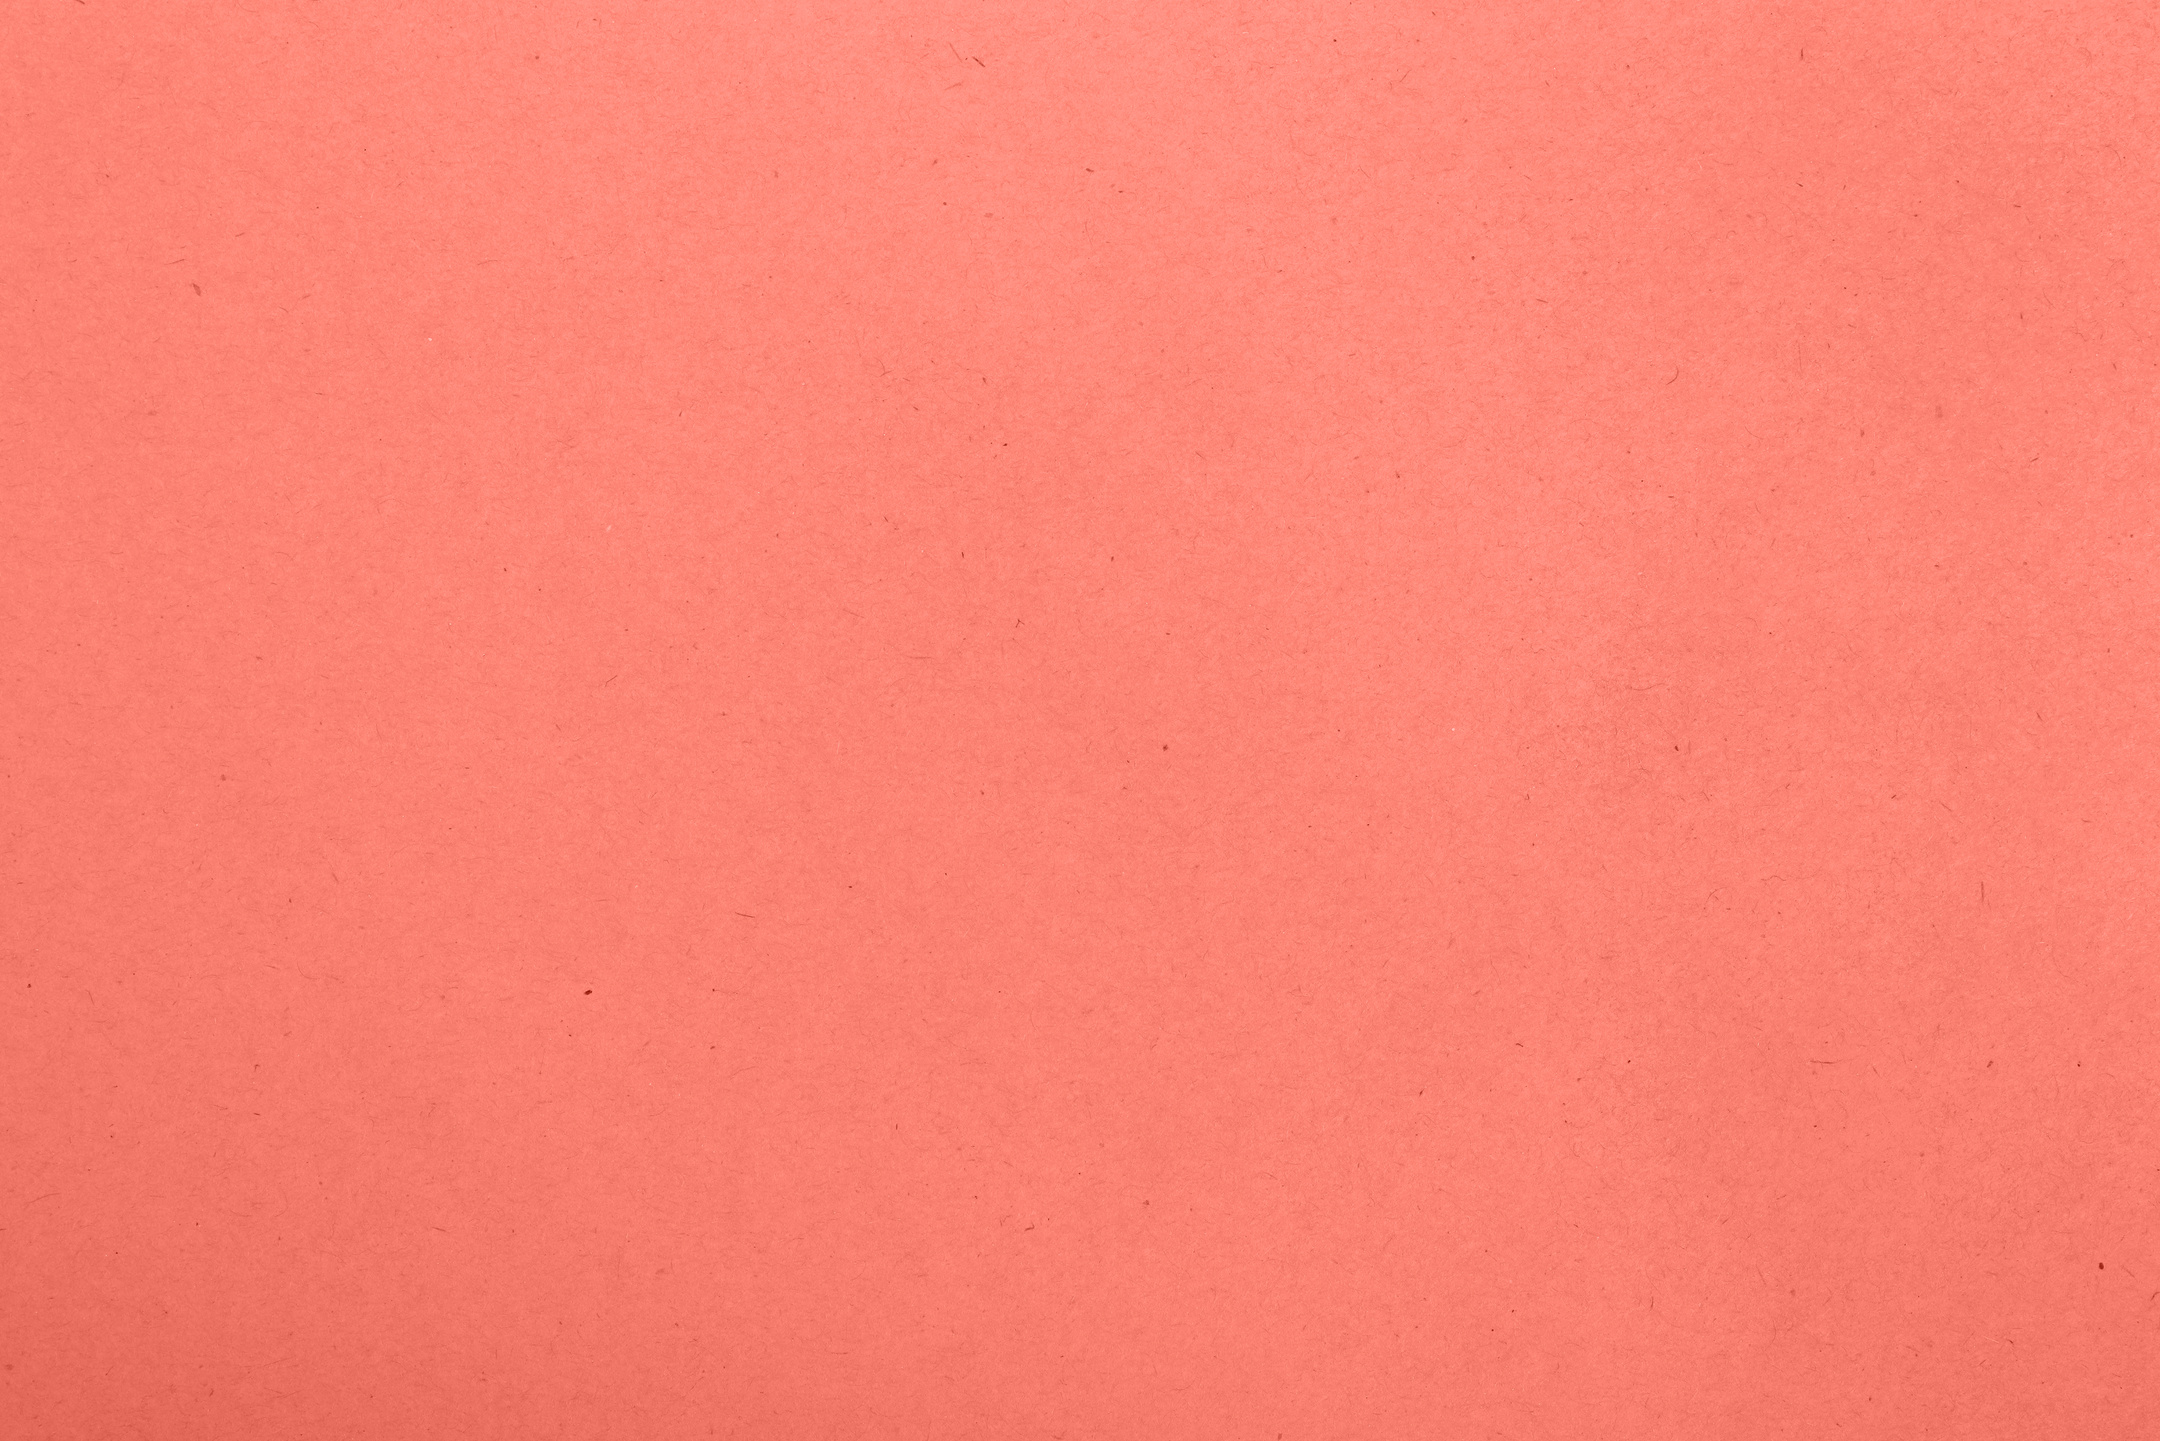 Coral pink toned paper parchment background